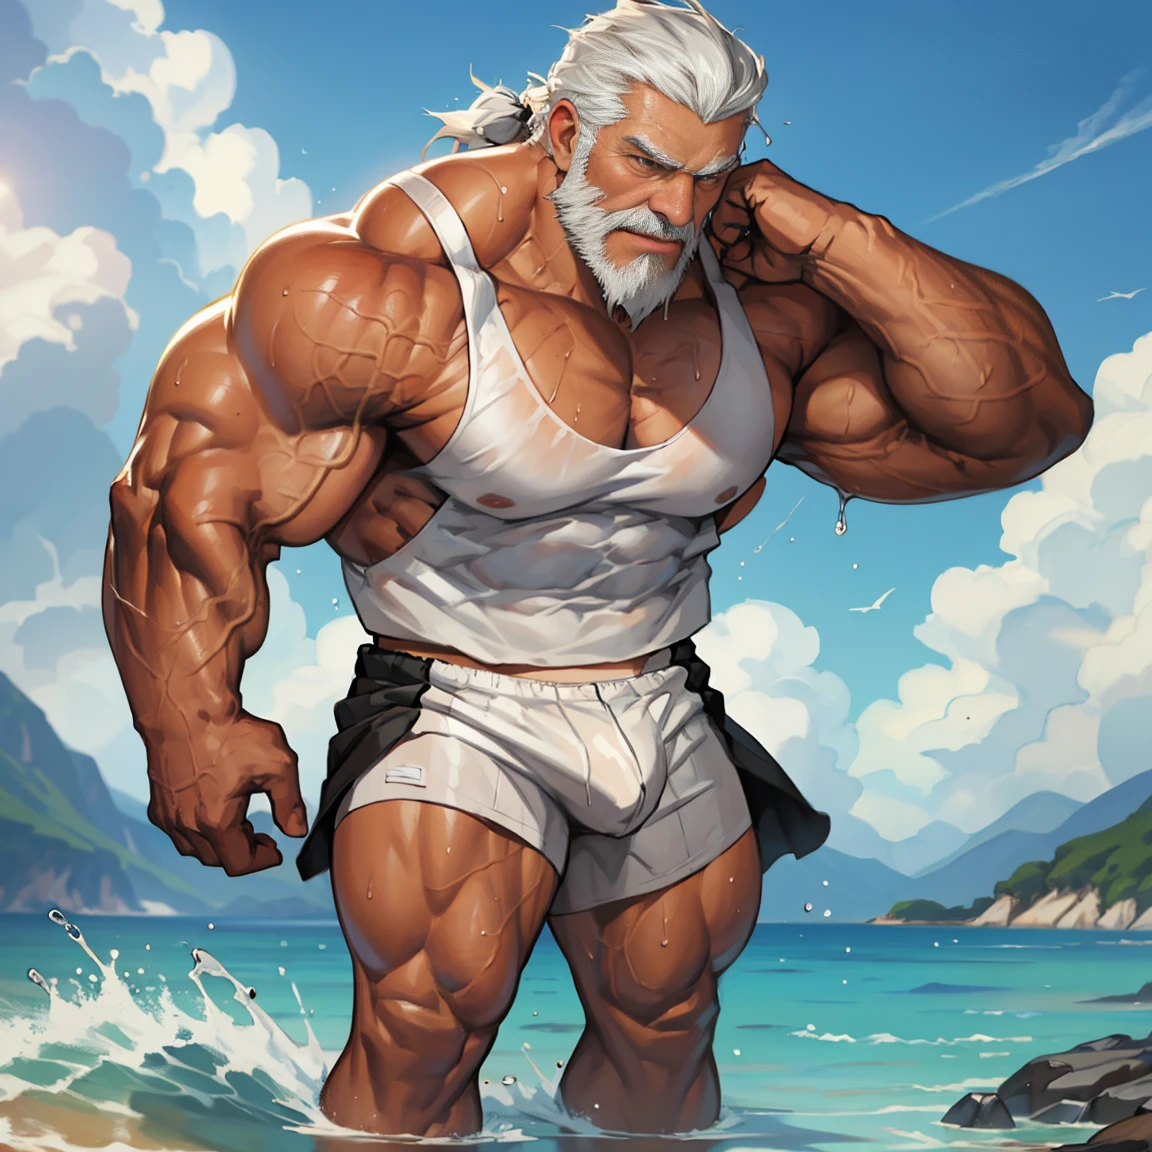 (best quality,photo-realistic:1.37),caucasian,elderly man,white beard,white hair,frontal view,full body,well-built, muscular daddy,hairy daddy,standing in the distance,on a grassy field during the day,upper body wearing a half-rolled-up white tank top,lower body wearing underwear,expressionless,alone,blushing face,sealed lips,drenched with water all over the body,clothes and underwear semi-transparent due to water,sexy,revealing physique,no explicit content,no blocked content,realistic，No NSFW，sfw，sexy but not Too pornographic ，hot but not too sexy，no Content that causes blocking，Completely healthy, No pornography, No aggressive content，Completely sfw，No nsfw content，safe for work